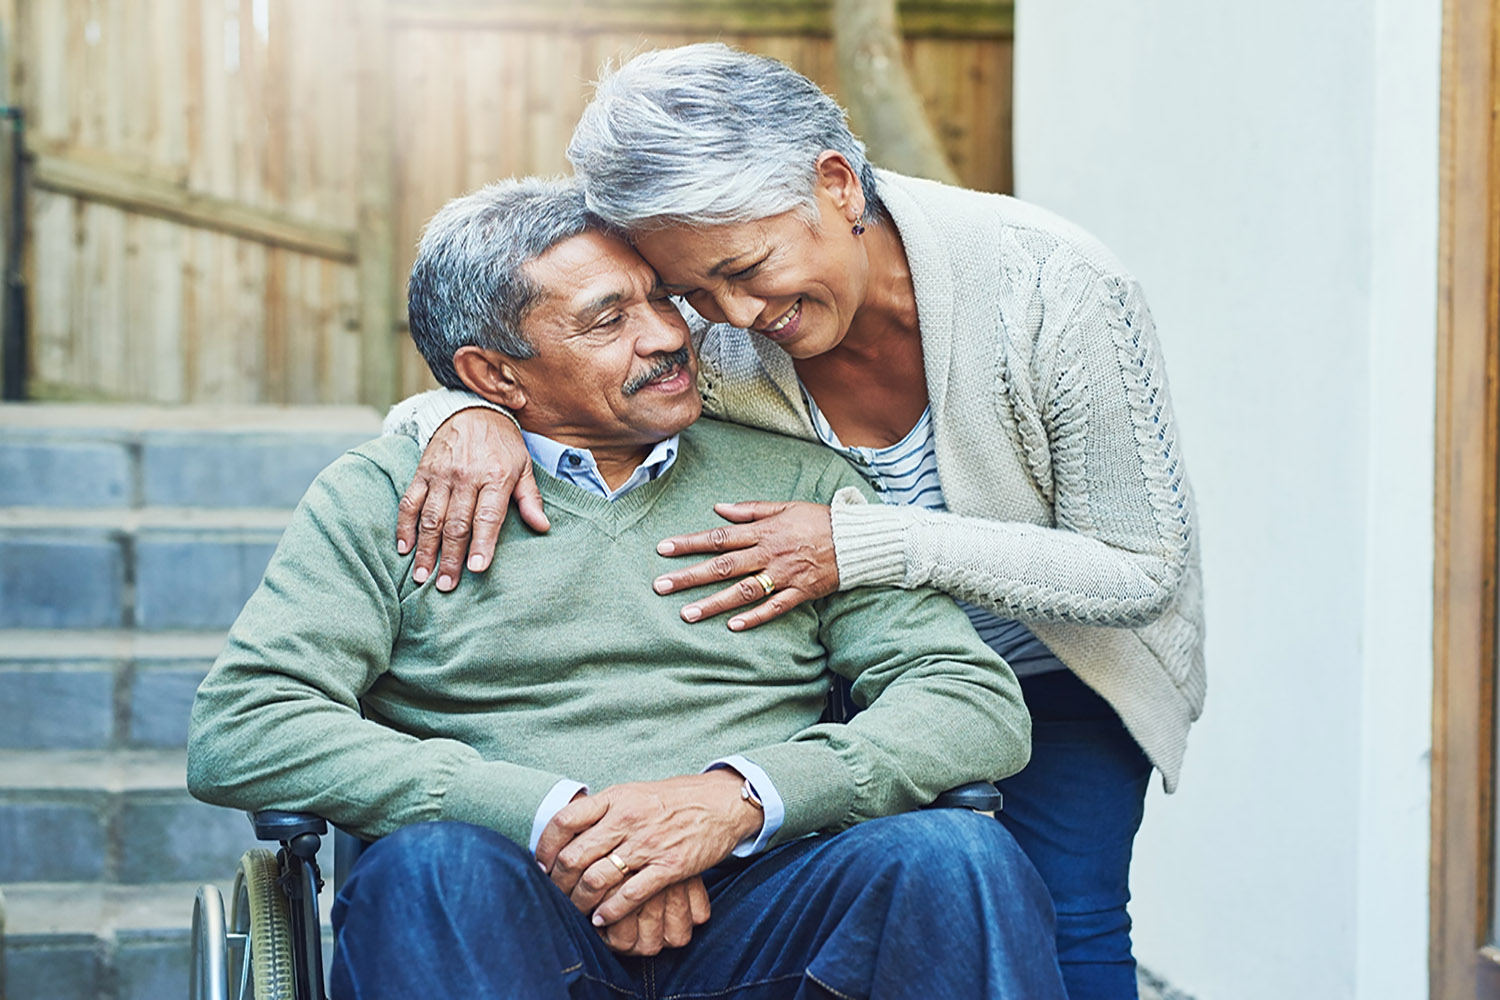 Older Latin couple with gray/salt pepper hair color hugging. Man is sitting down in a wheelchair with a green sweater on. Women is standing above him in a cream colored sweater